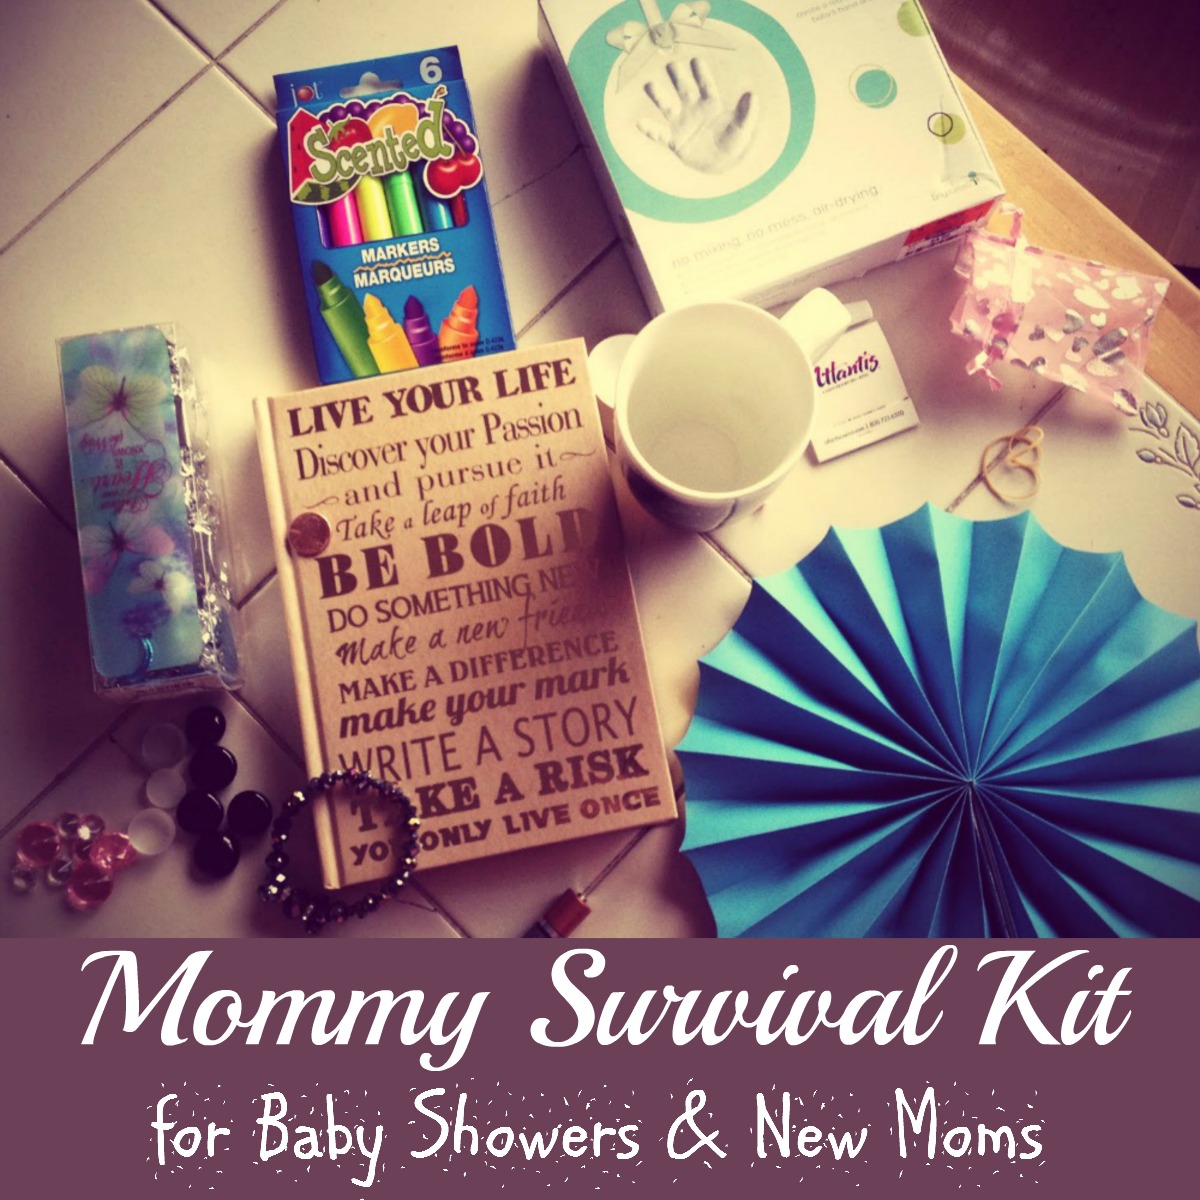 Reviews, & How-Tos: DIY Mommy Survival Kit (Great Shower / Mom Gift!)